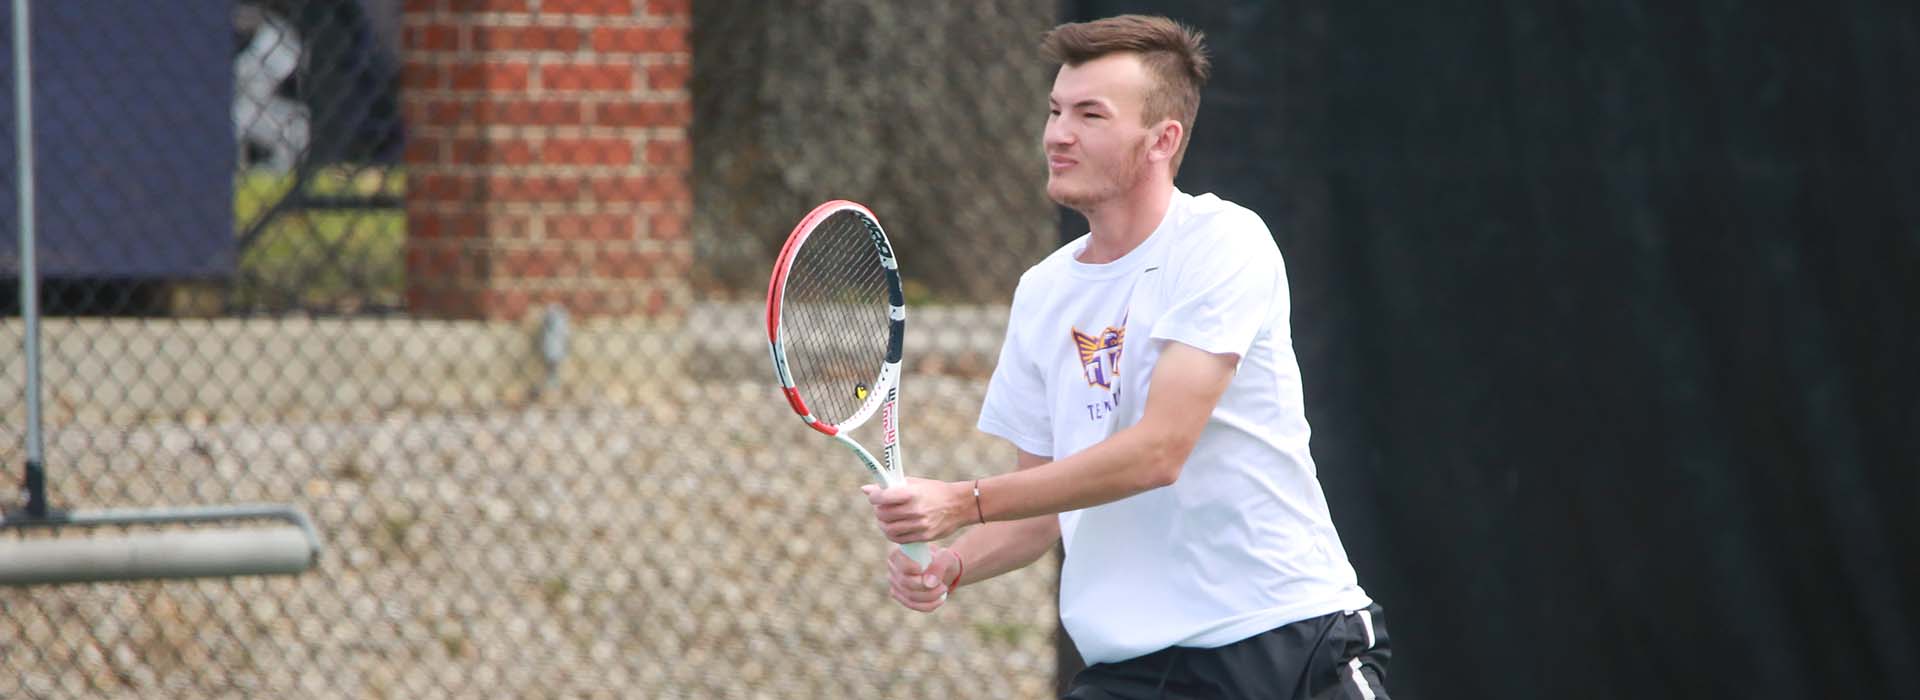 Tech on its way to fifth straight OVC Tournament title match with 4-1 win over Austin Peay